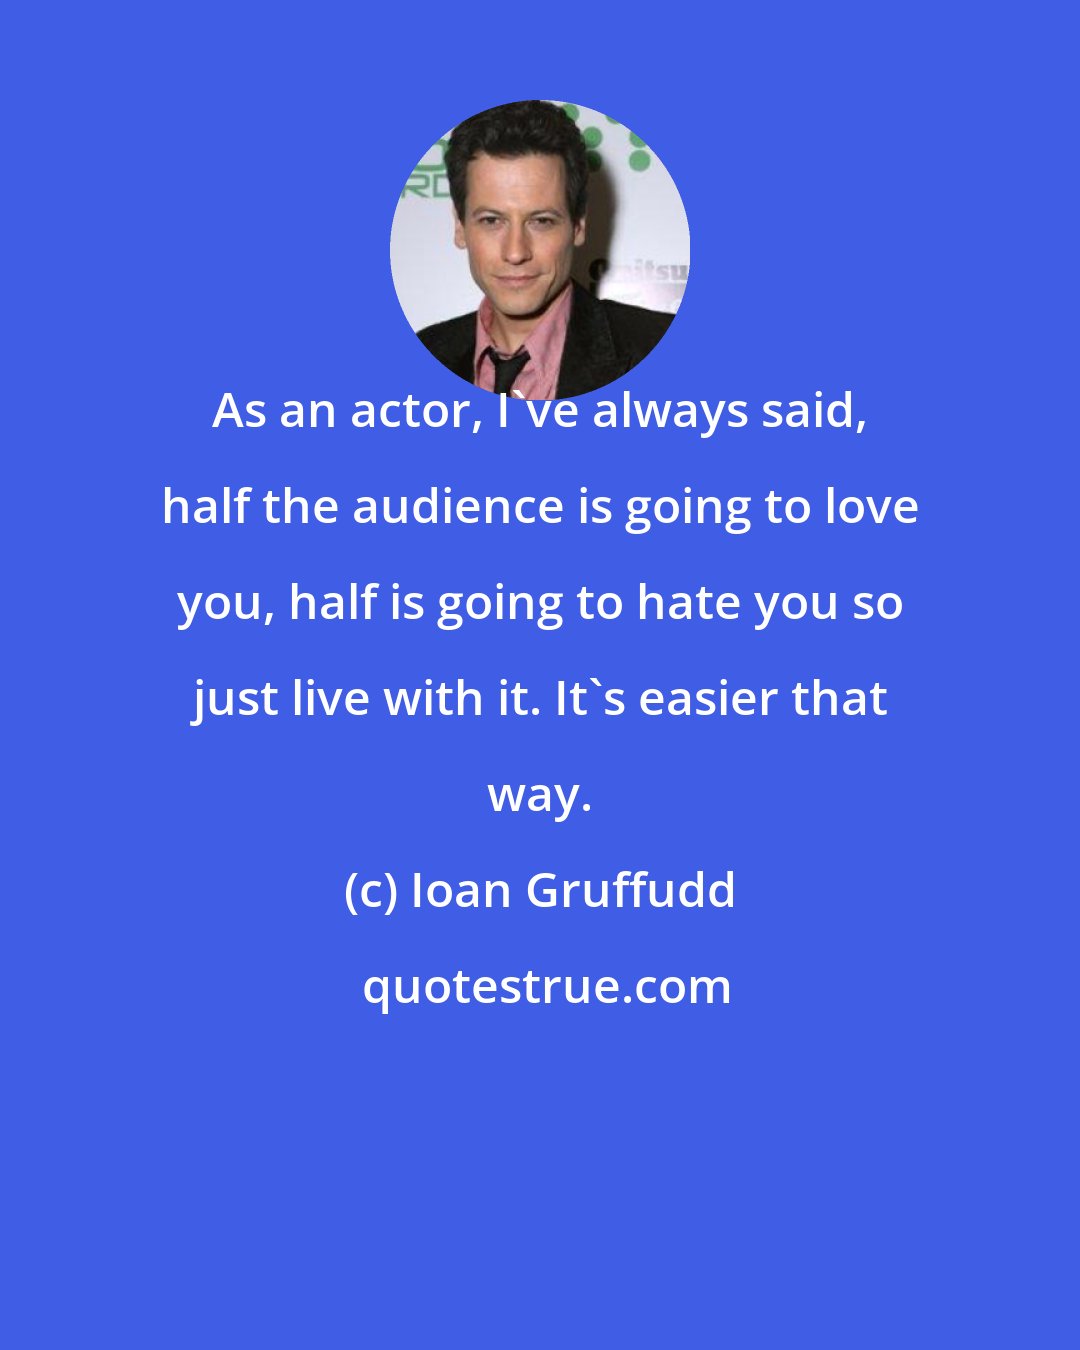 Ioan Gruffudd: As an actor, I've always said, half the audience is going to love you, half is going to hate you so just live with it. It's easier that way.